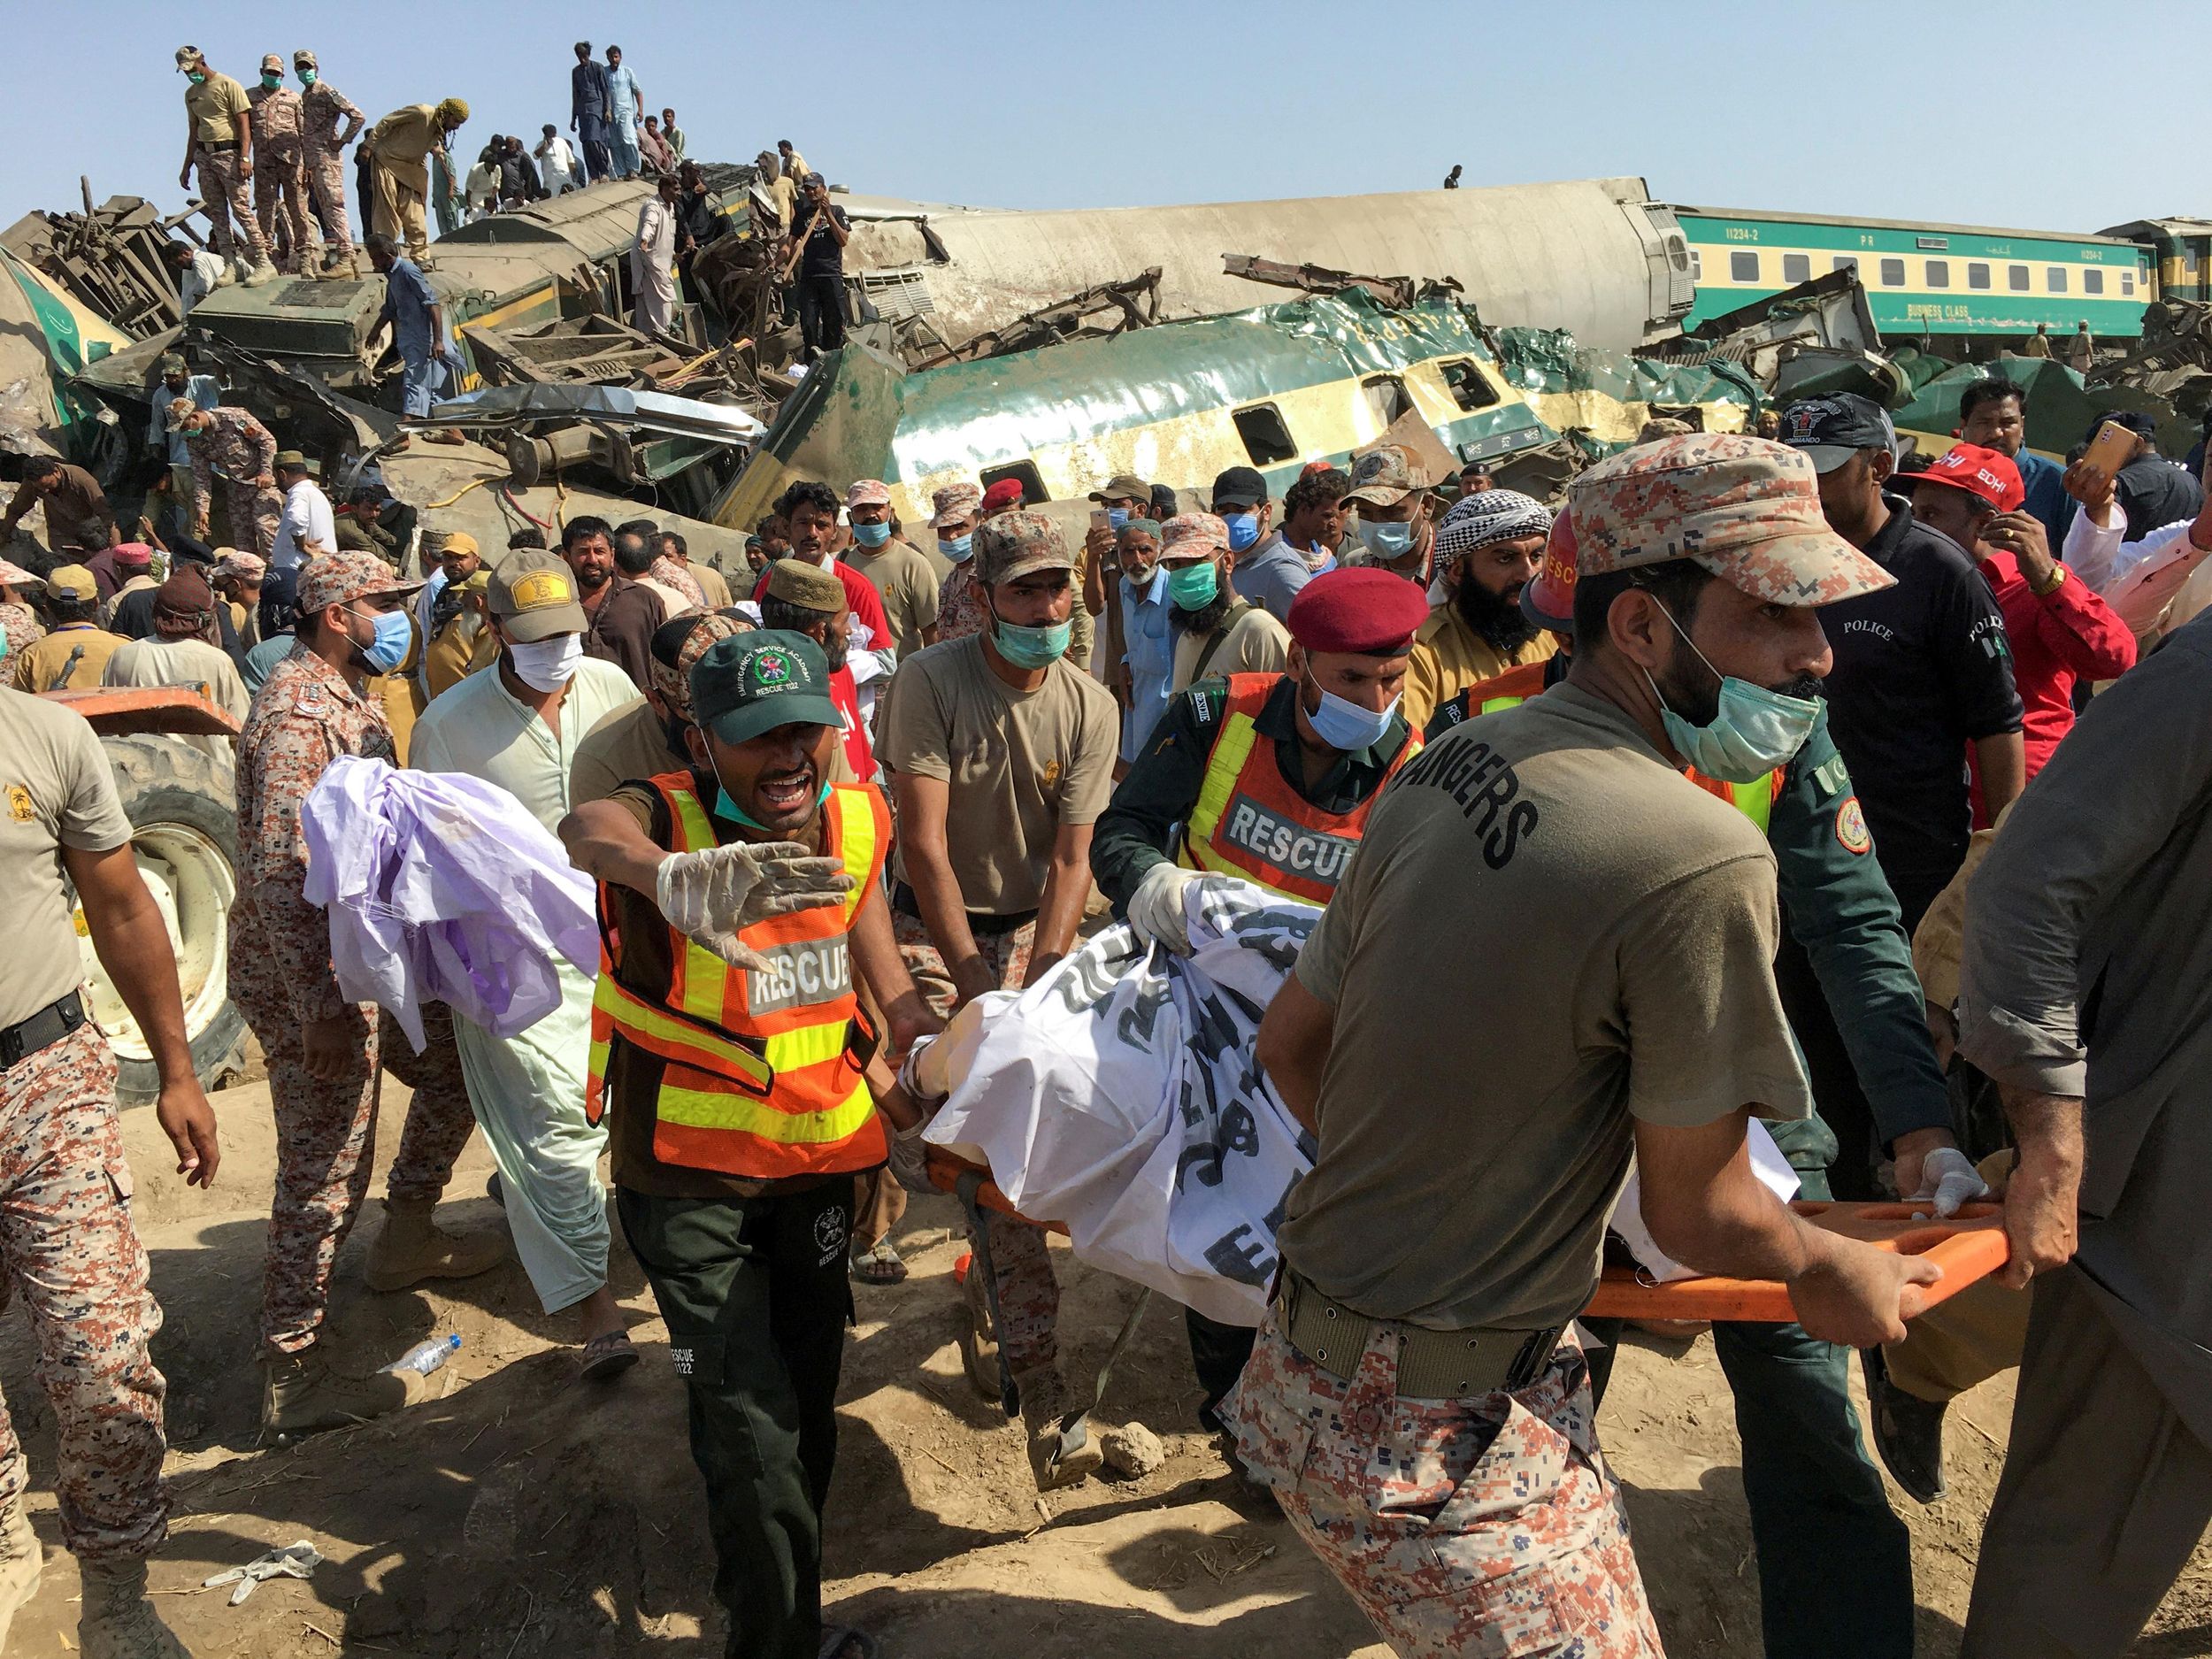 Paramilitary soldiers and rescue workers move a body of a man from the site following a collision between two trains in Ghotki, Pakistan June 7, 2021.